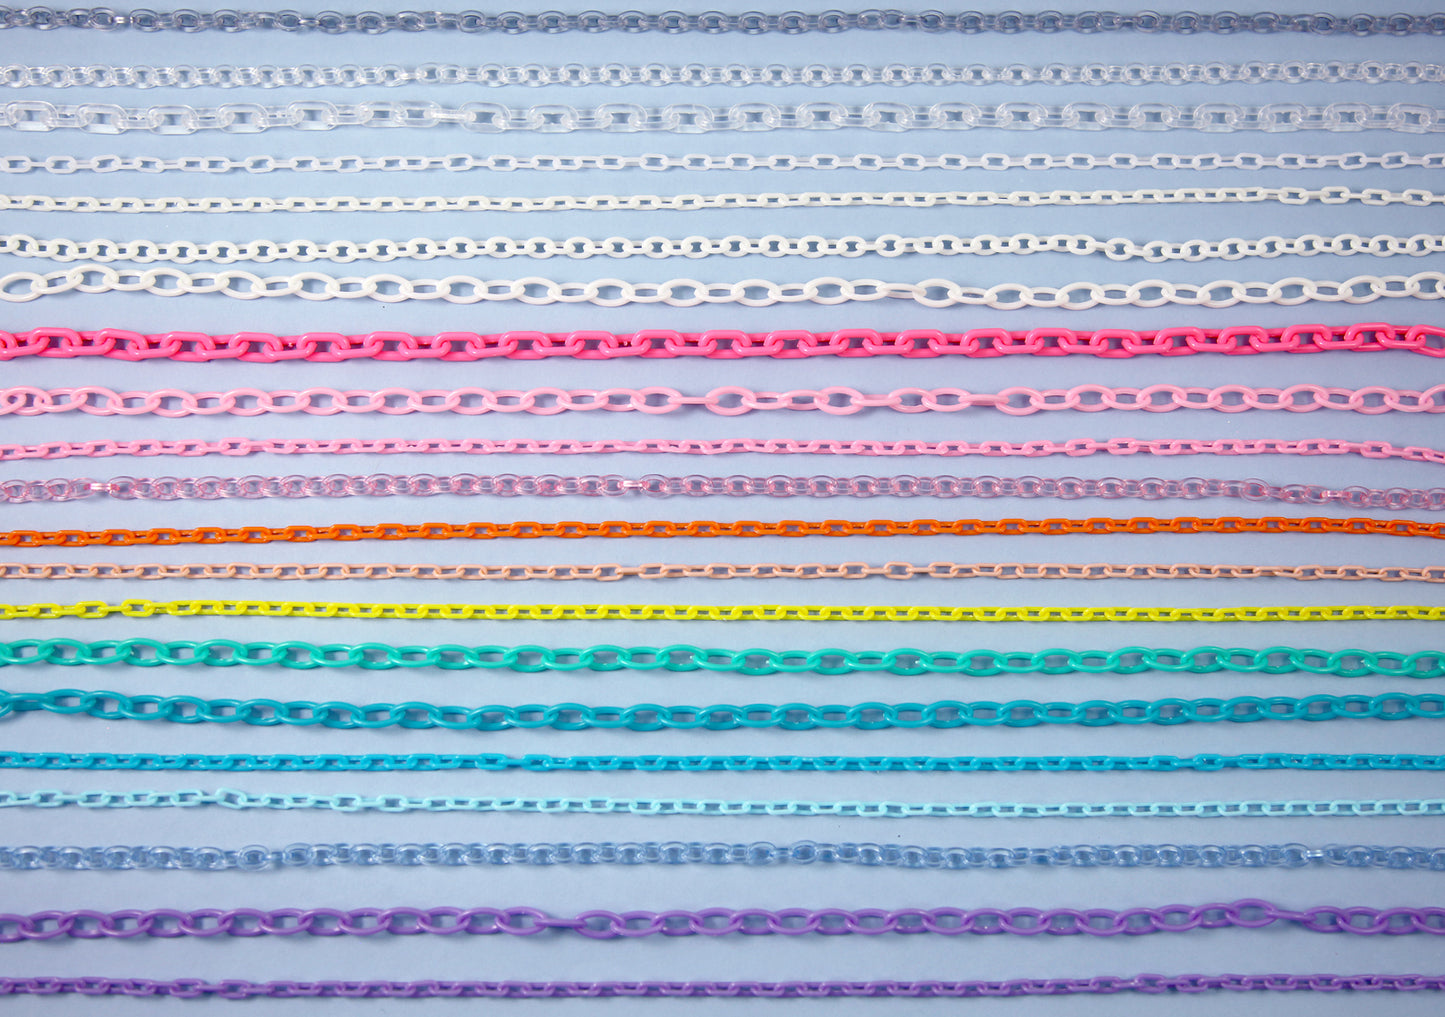 Plastic Chain Grab Bag - Mixed Lot of Acrylic Chains - great for necklaces, ispy, sensory crafts, phone straps - 20 pcs